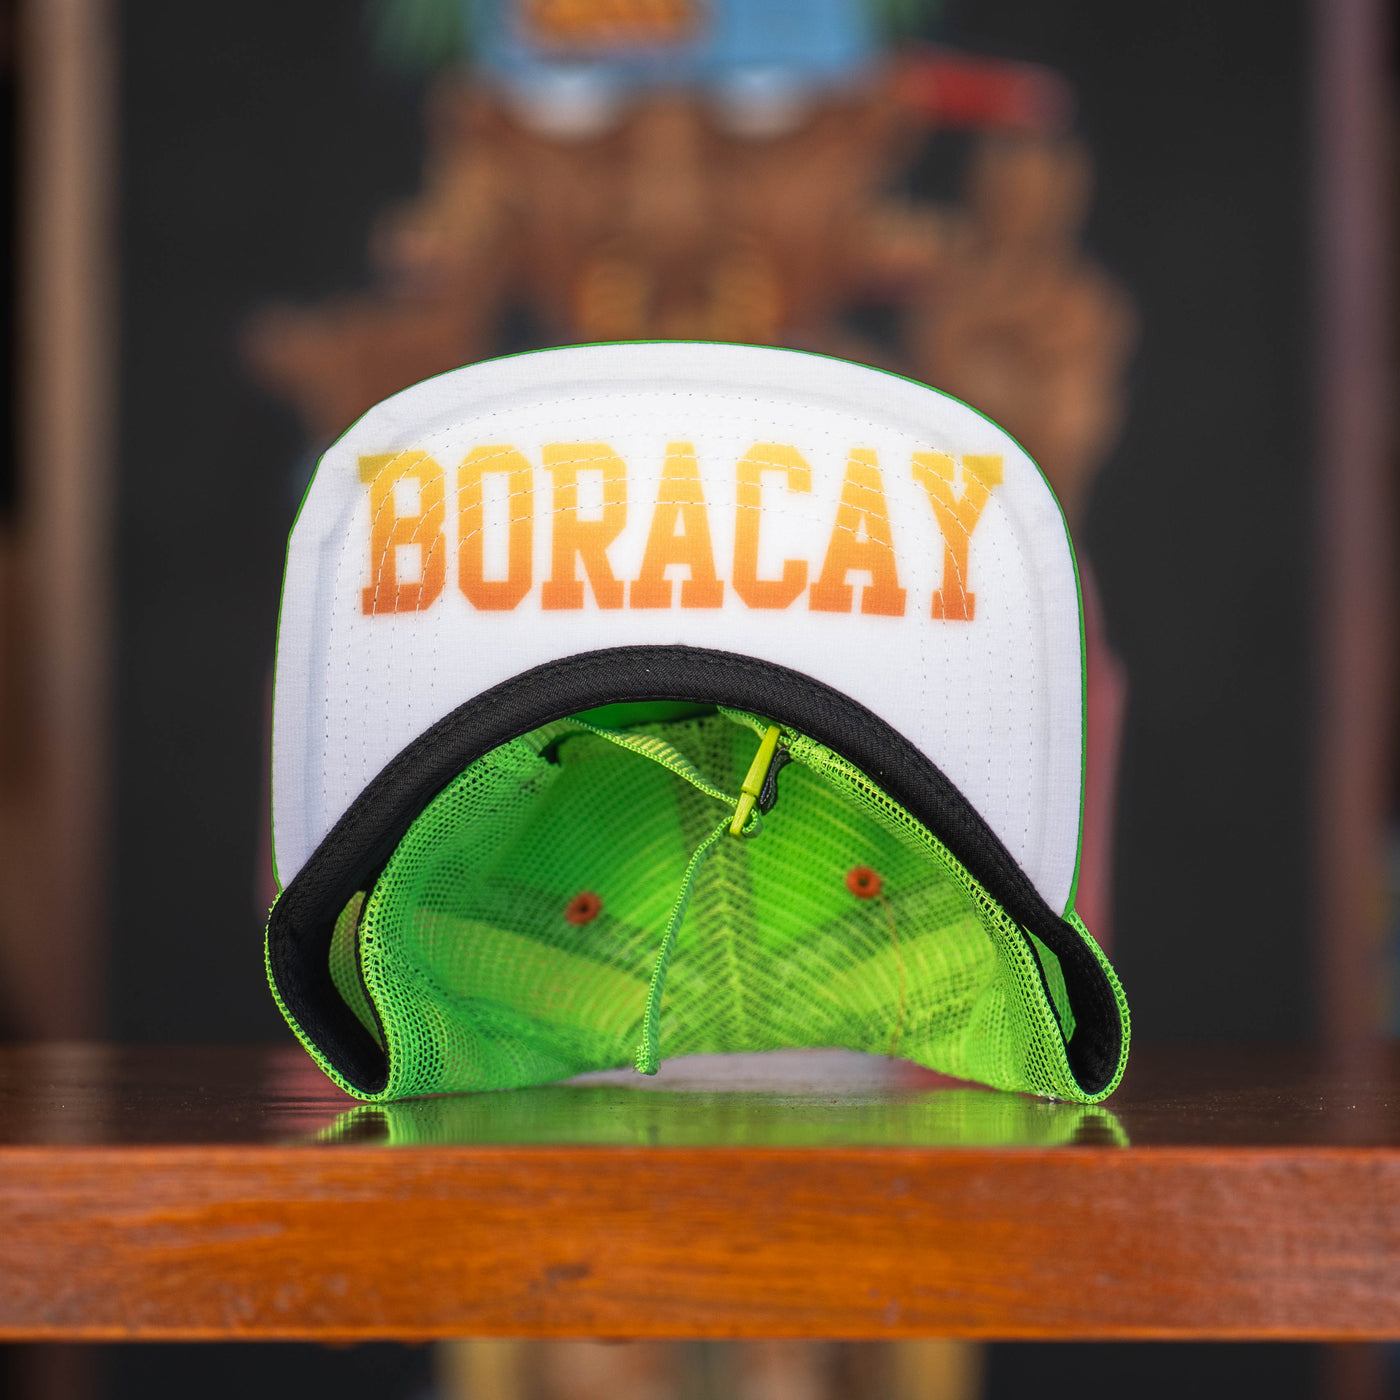 Lost in Paradise Snapback